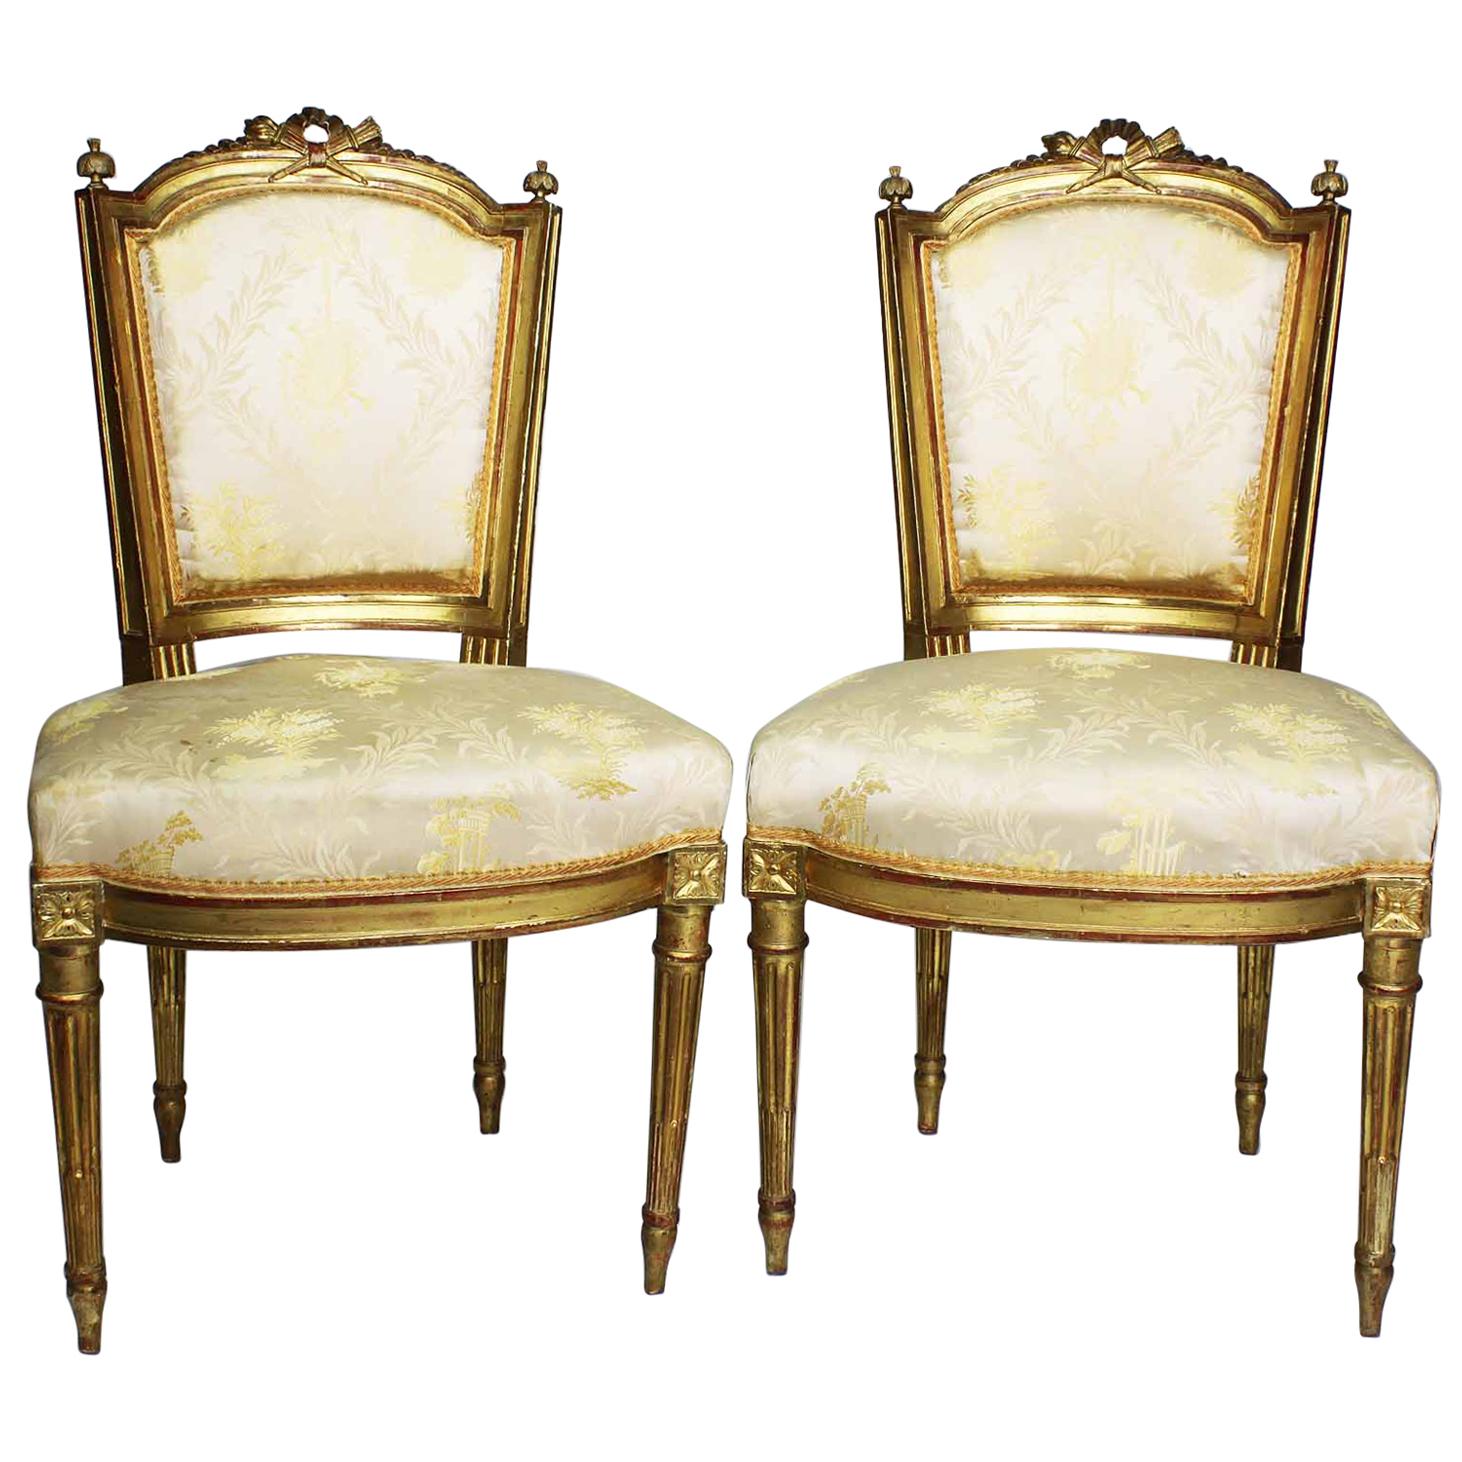 Pair of French 19th Century Louis XVI Style Giltwood Carved Boudoir Side Chairs